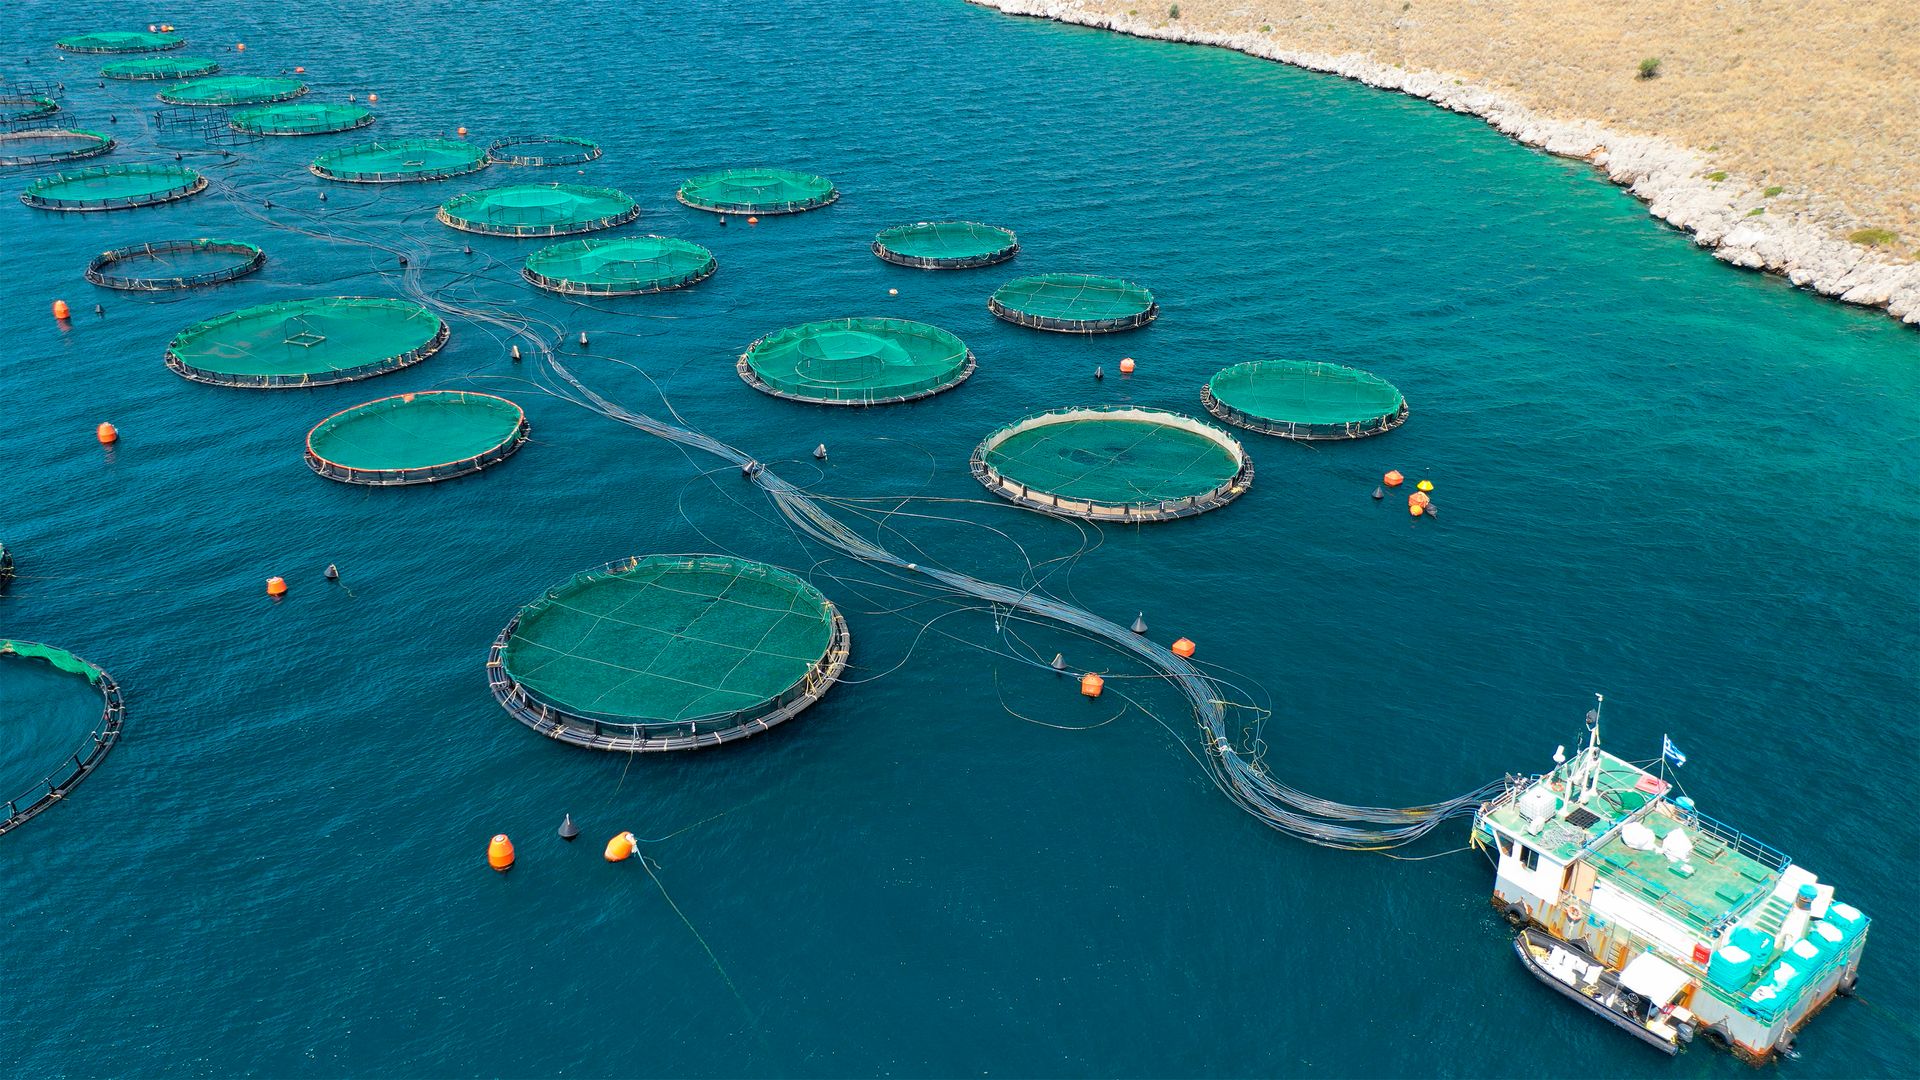 Image of nets from an aquaculture farm from above